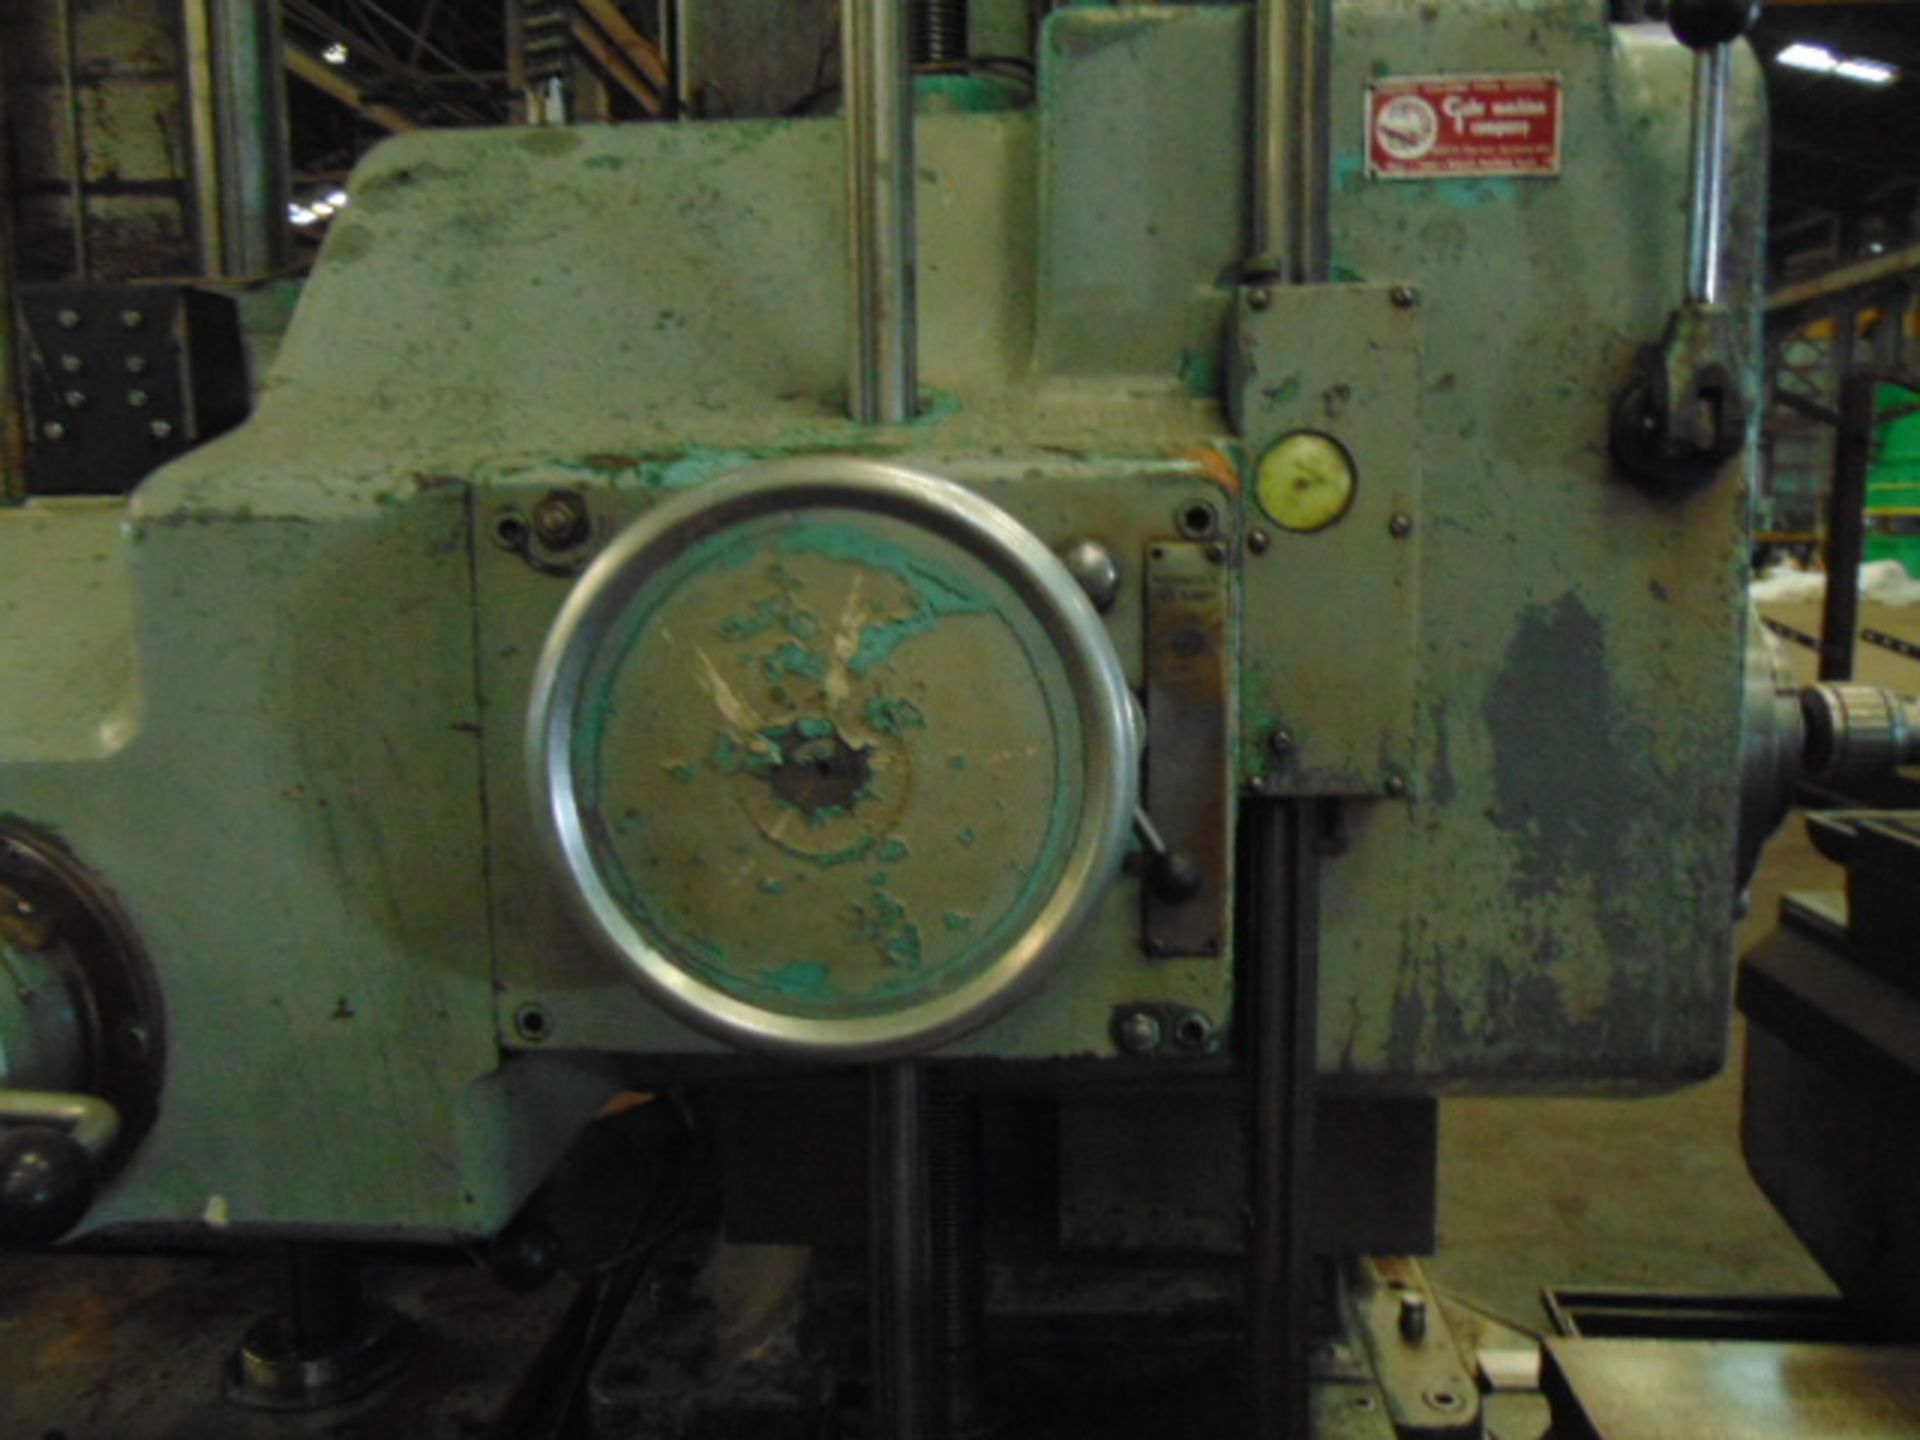 TABLE TYPE HORIZONTAL BORING MILL, LUCAS MDL. 428-60, 40" x 74" tbl., 60" cross travel, approx. - Image 5 of 16